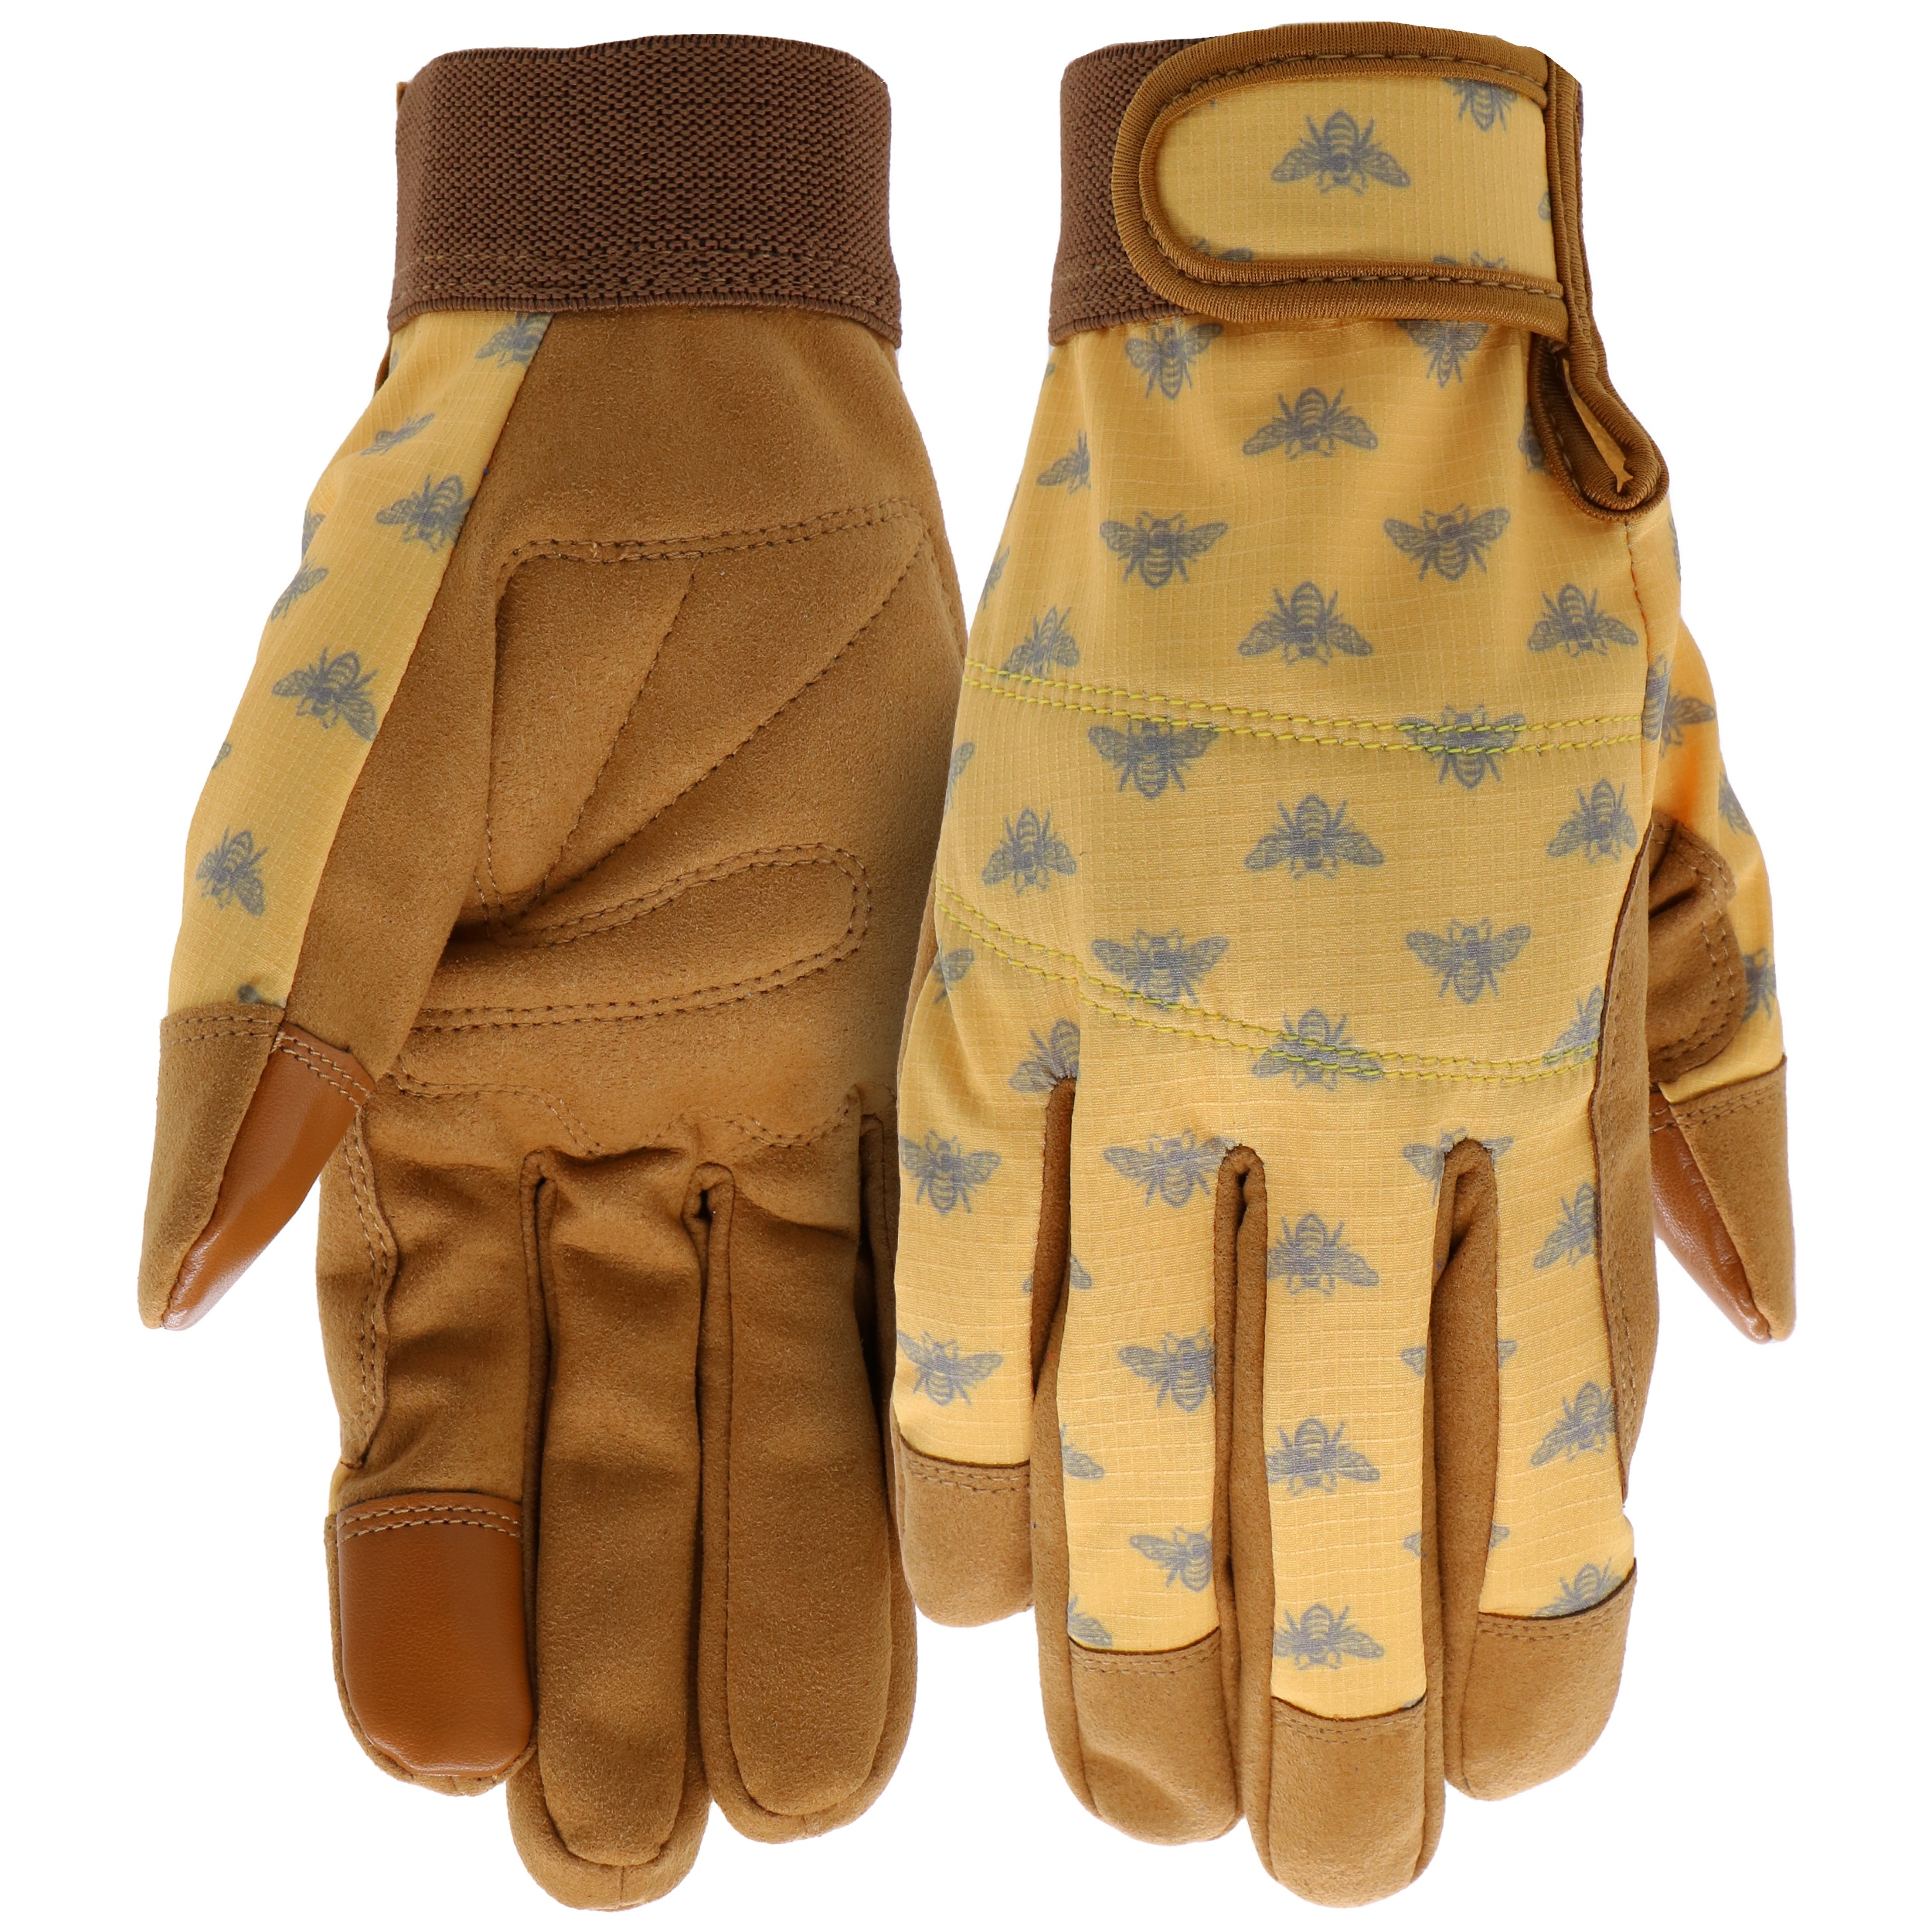 Wells Lamont Synthetic Leather Hi-Dexterity Camo Gloves, 1 Pair at